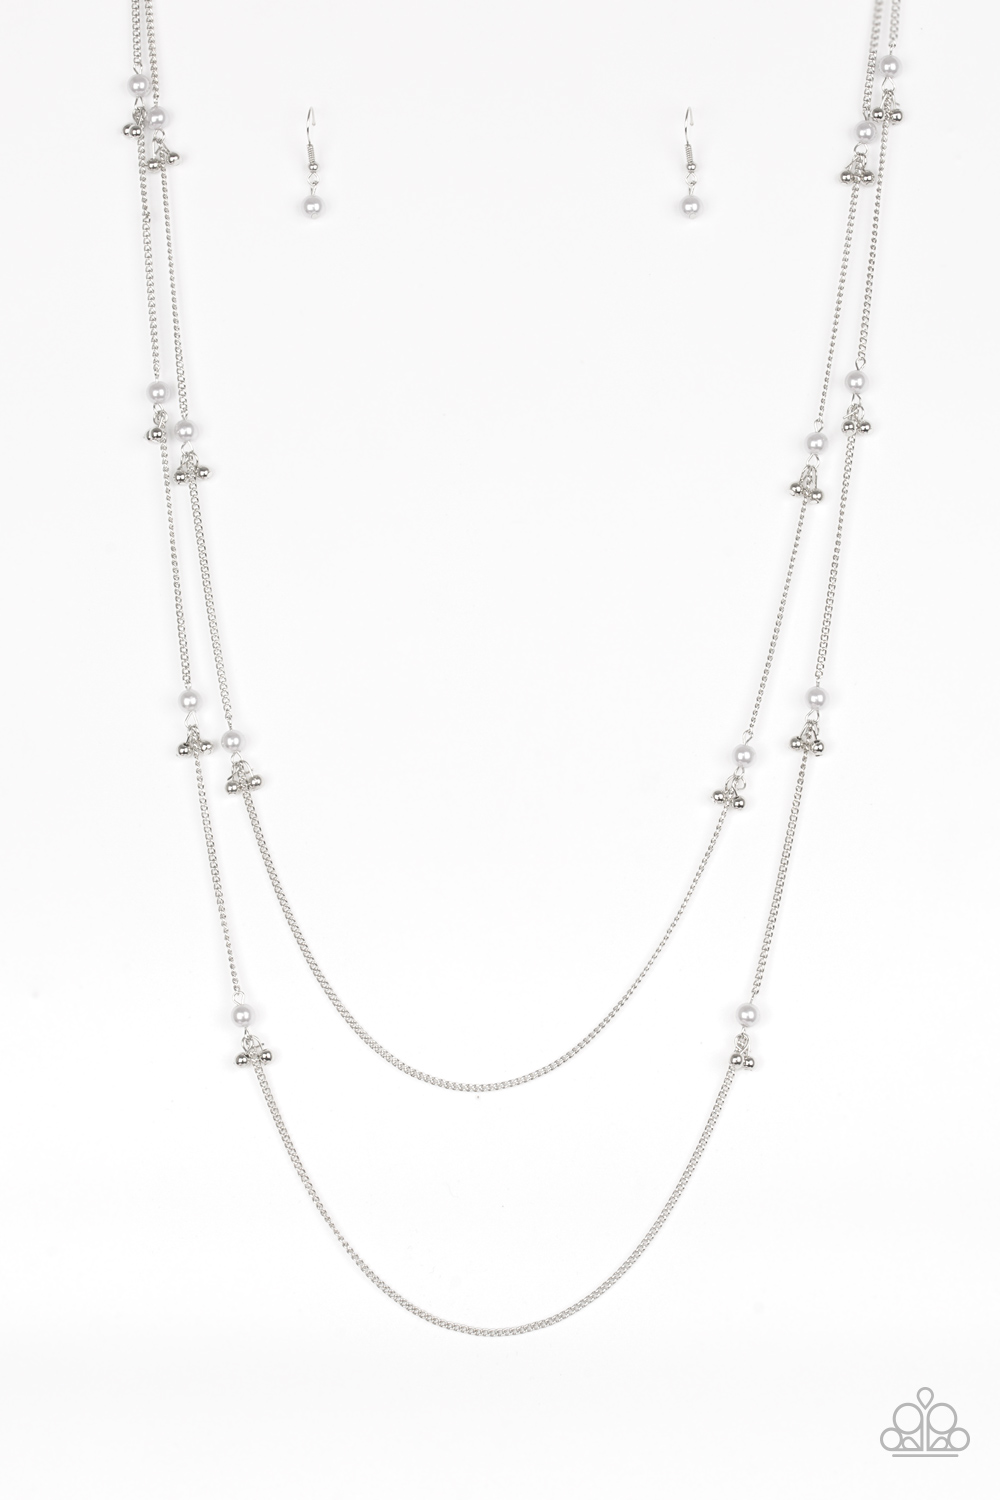 Necklace - Ultrawealthy - Silver